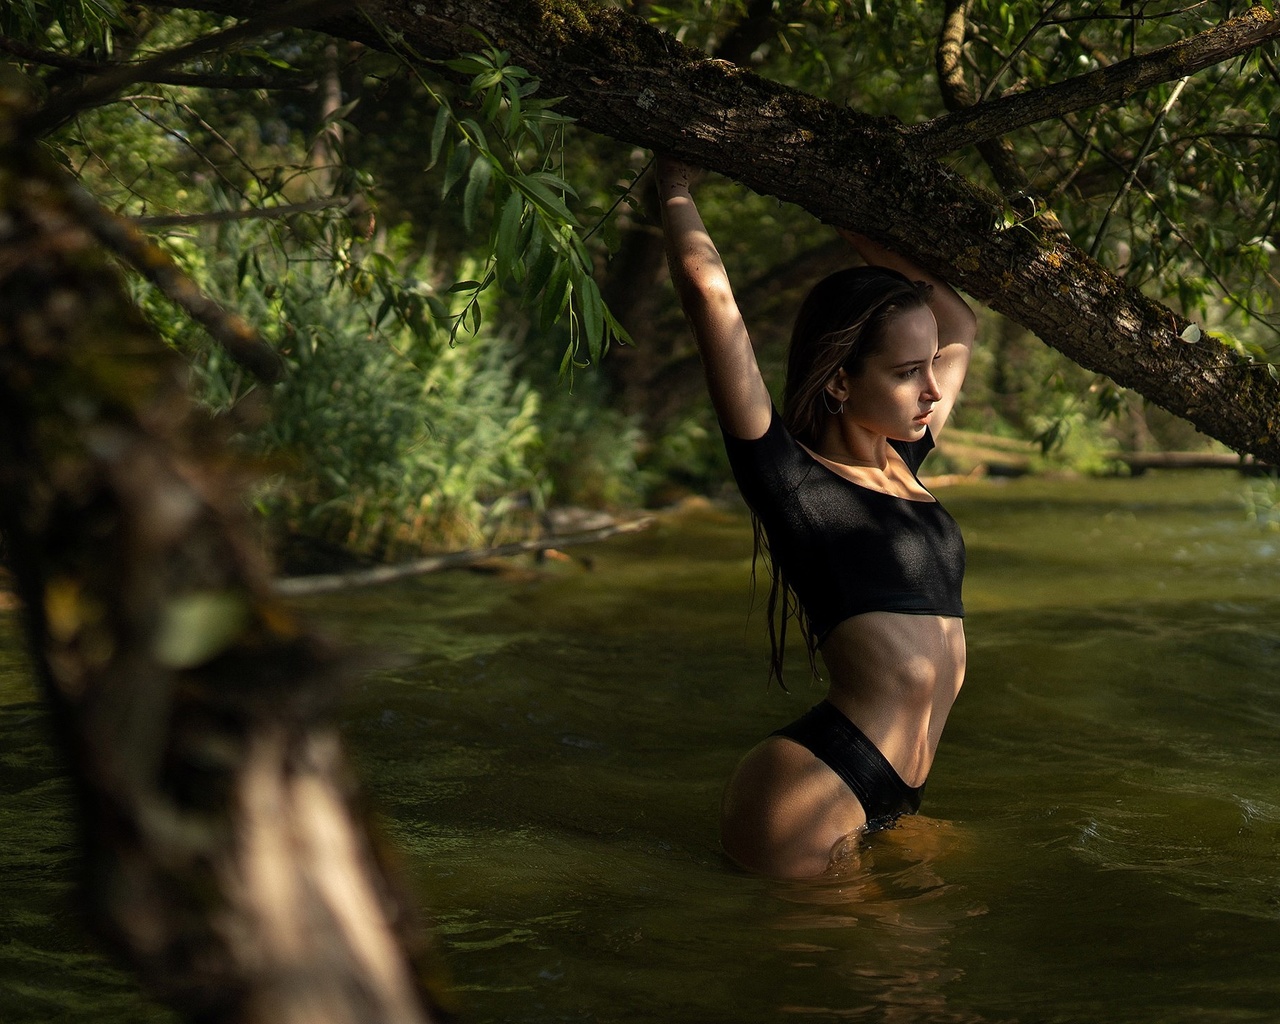 women, river, brunette, trees, women outdoors, wet body, black clothing, wet hair, arms up, ribs, belly